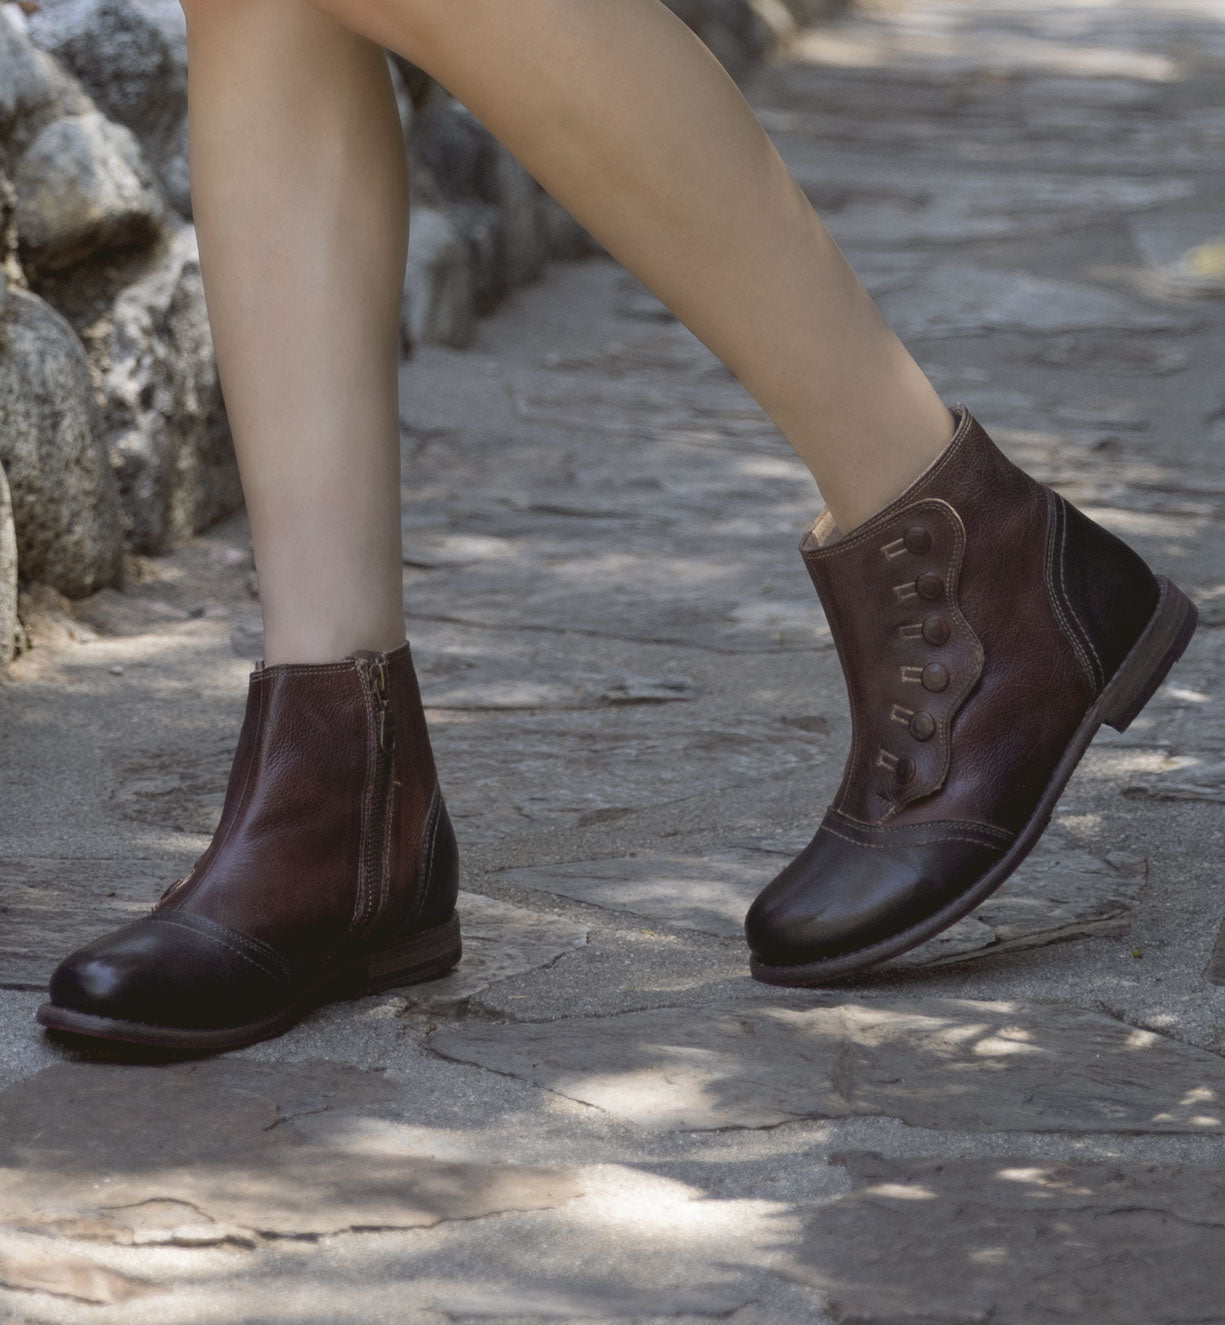 A woman wearing brown leather Josephine boots from Oak Tree Farms with a YKK zipper walking on a stone path.